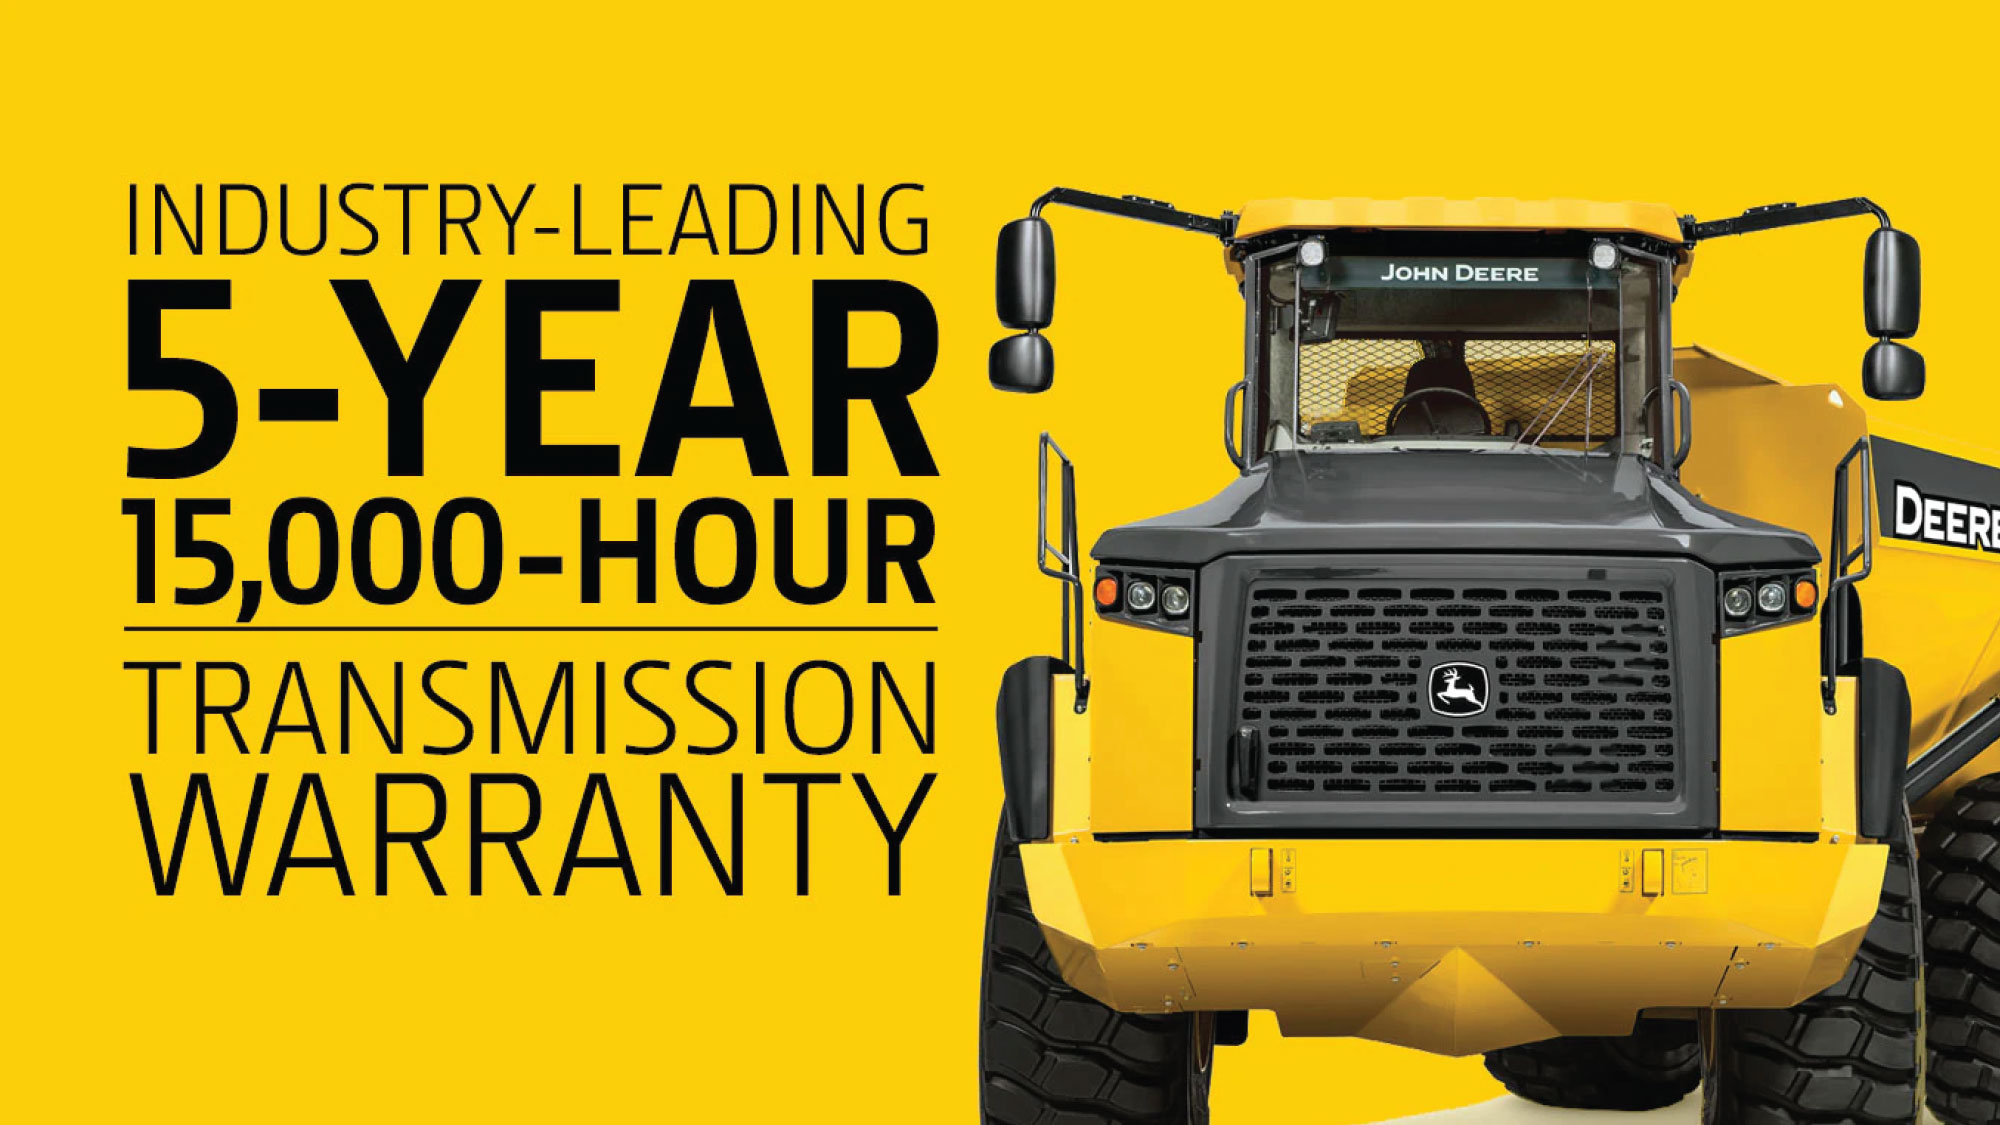 Industry-leading 5-year 15,000-hour Transmission Warranty